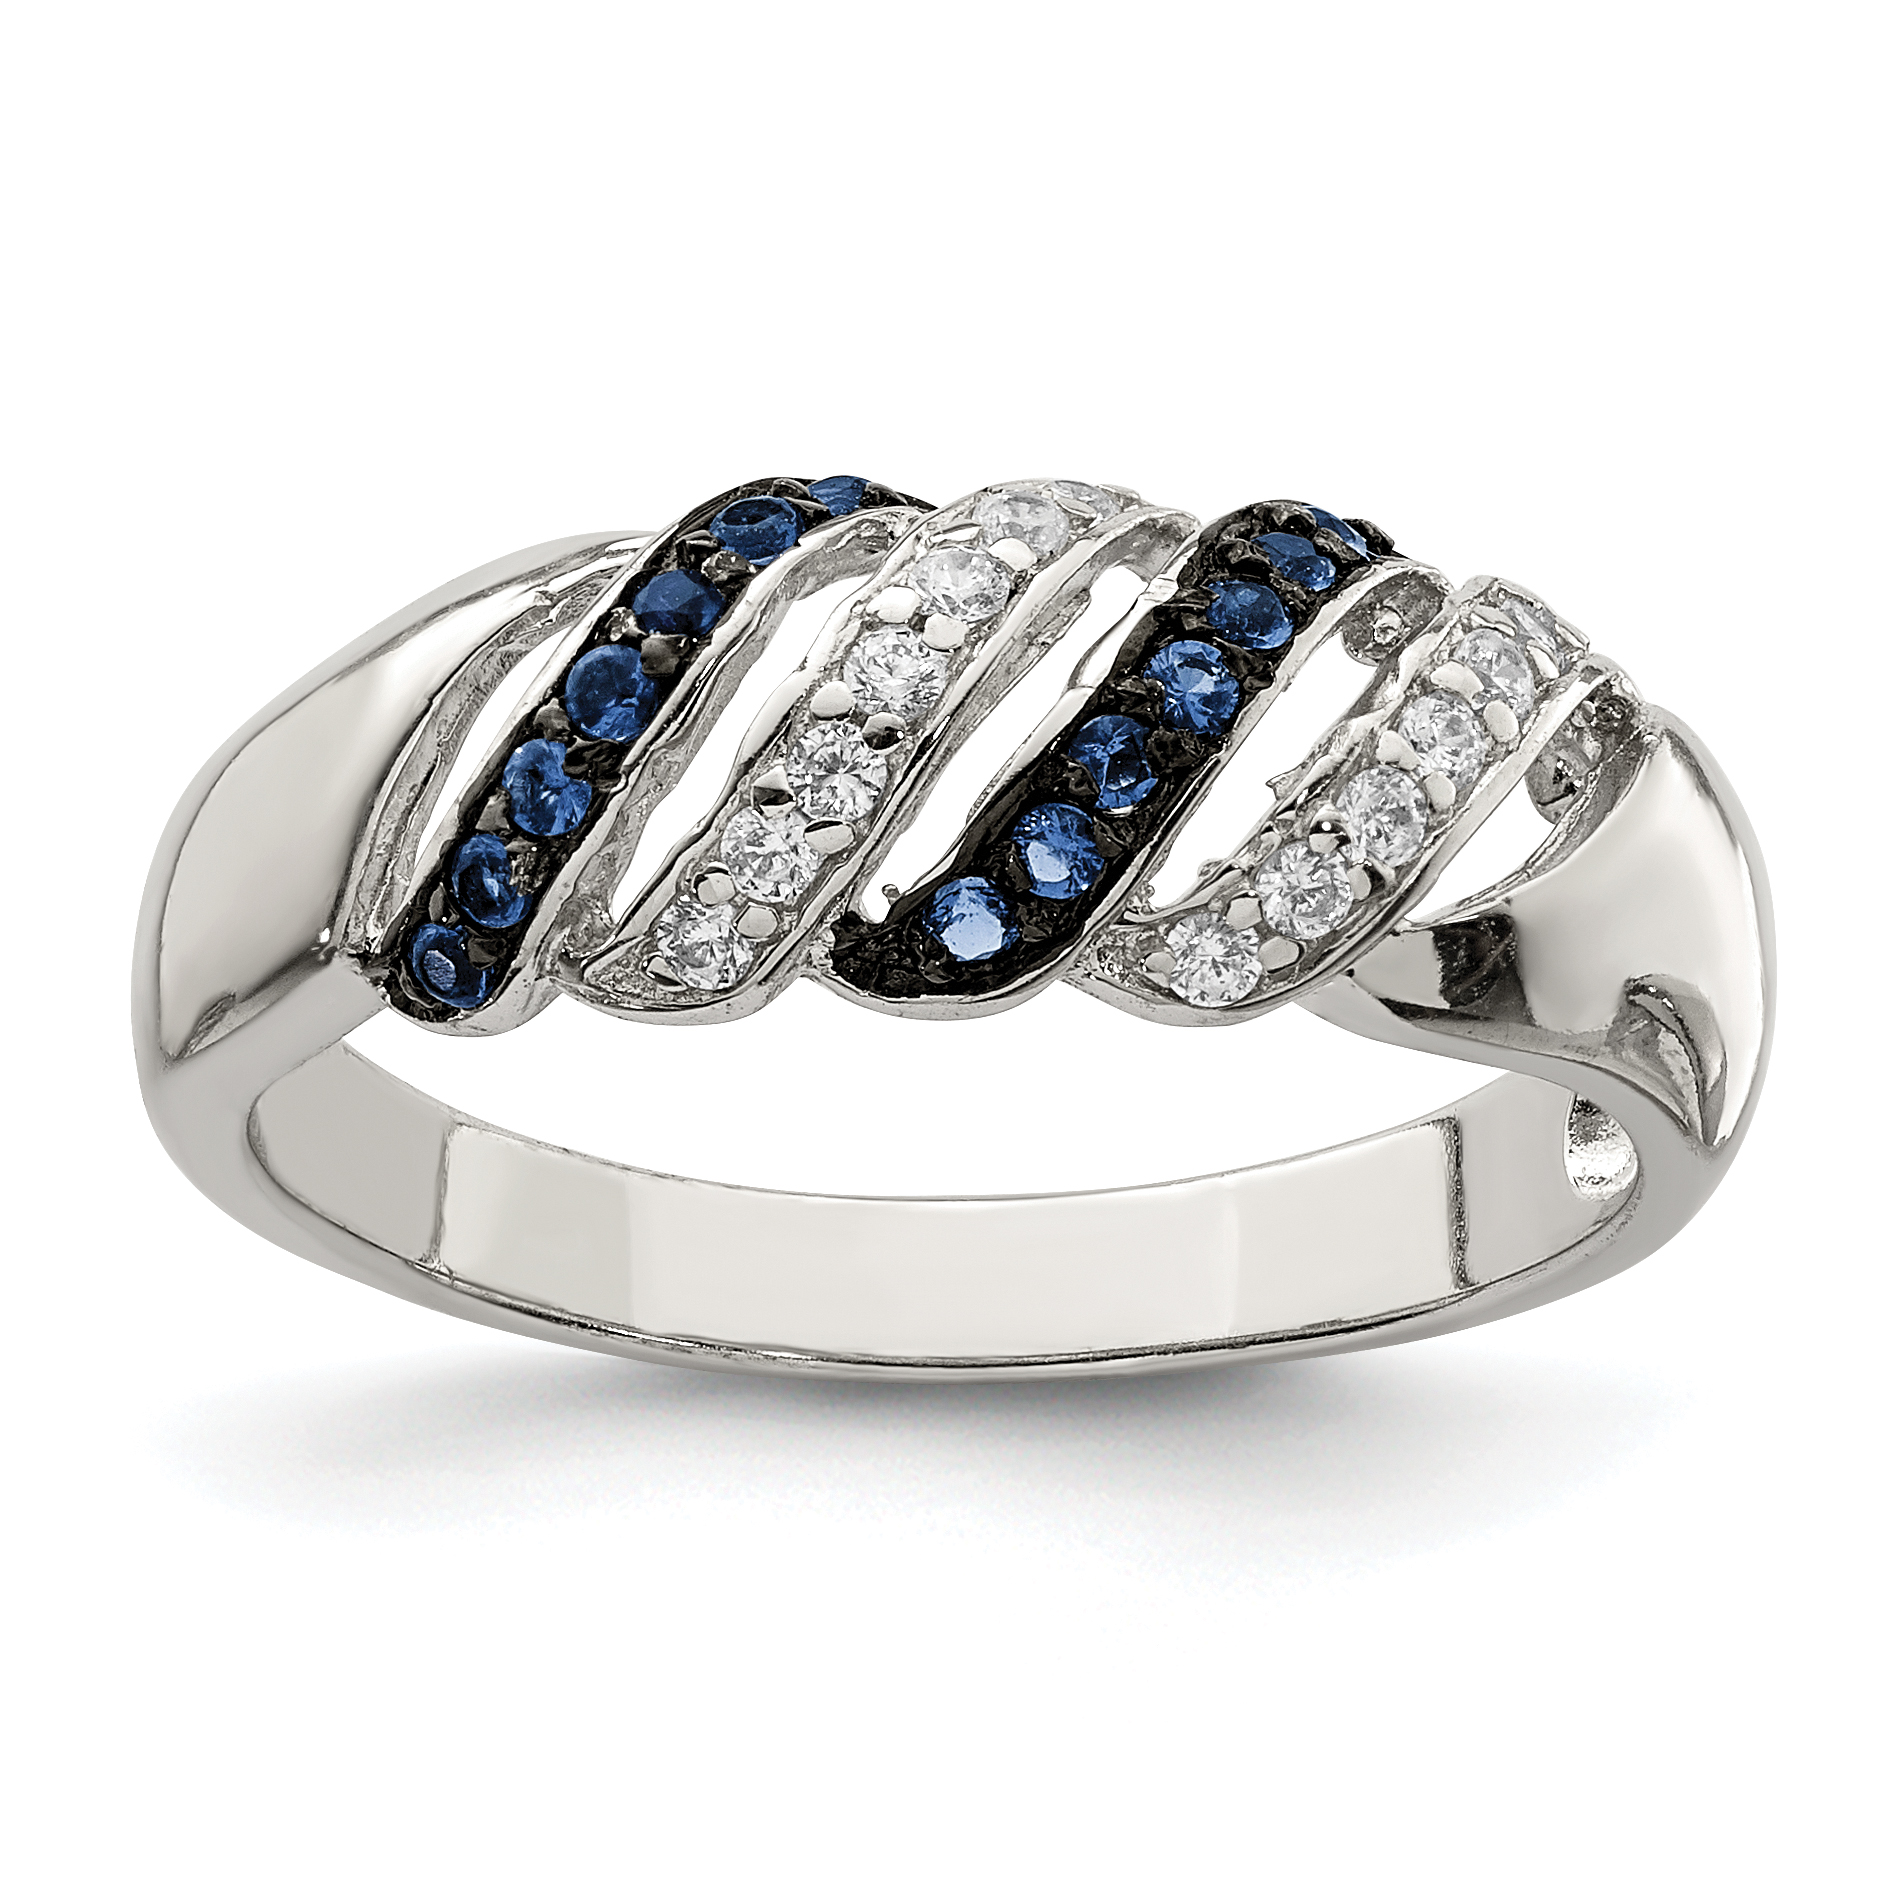 Core Silver Sterling Silver Polished CZ & Blue Glass Stone Ring